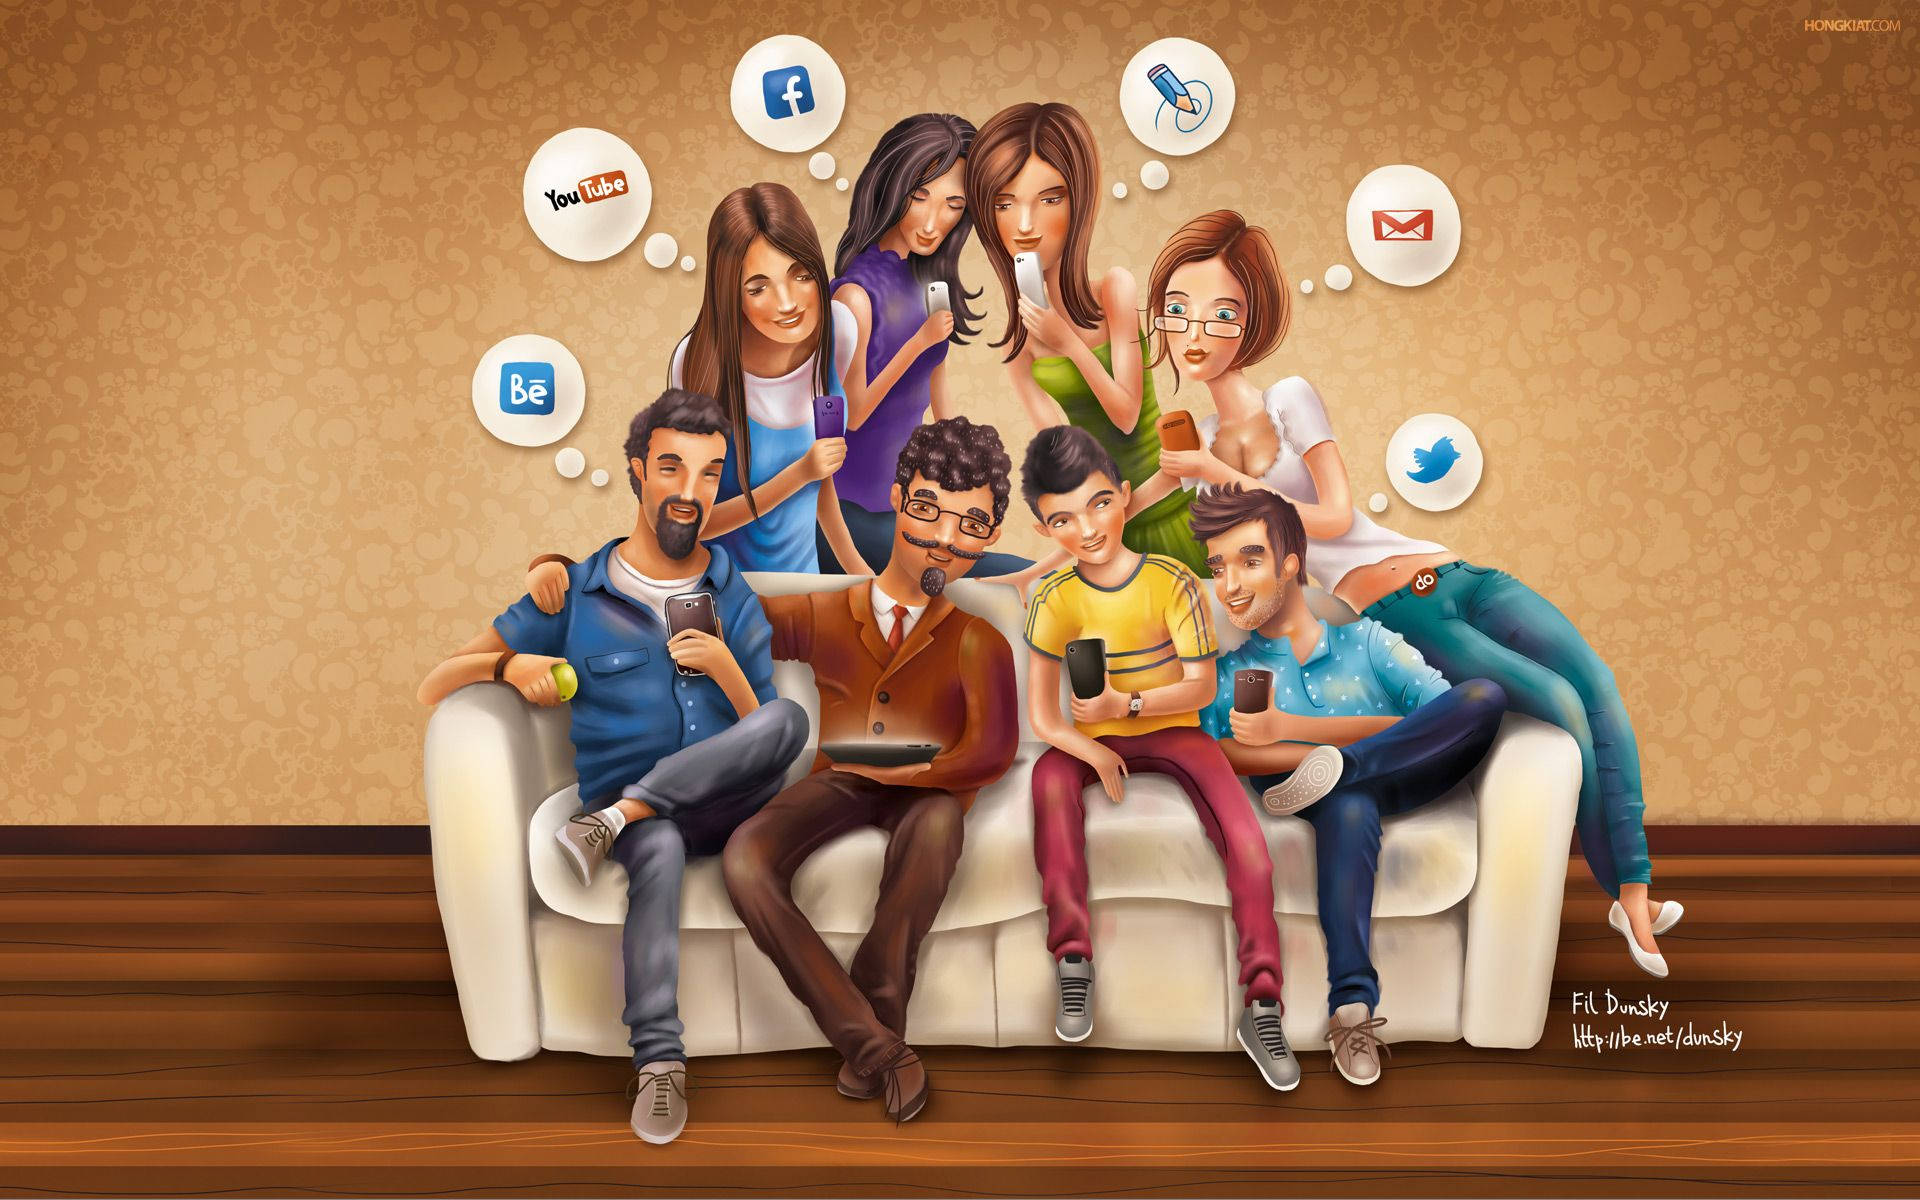 Social Network Influence To Family Background